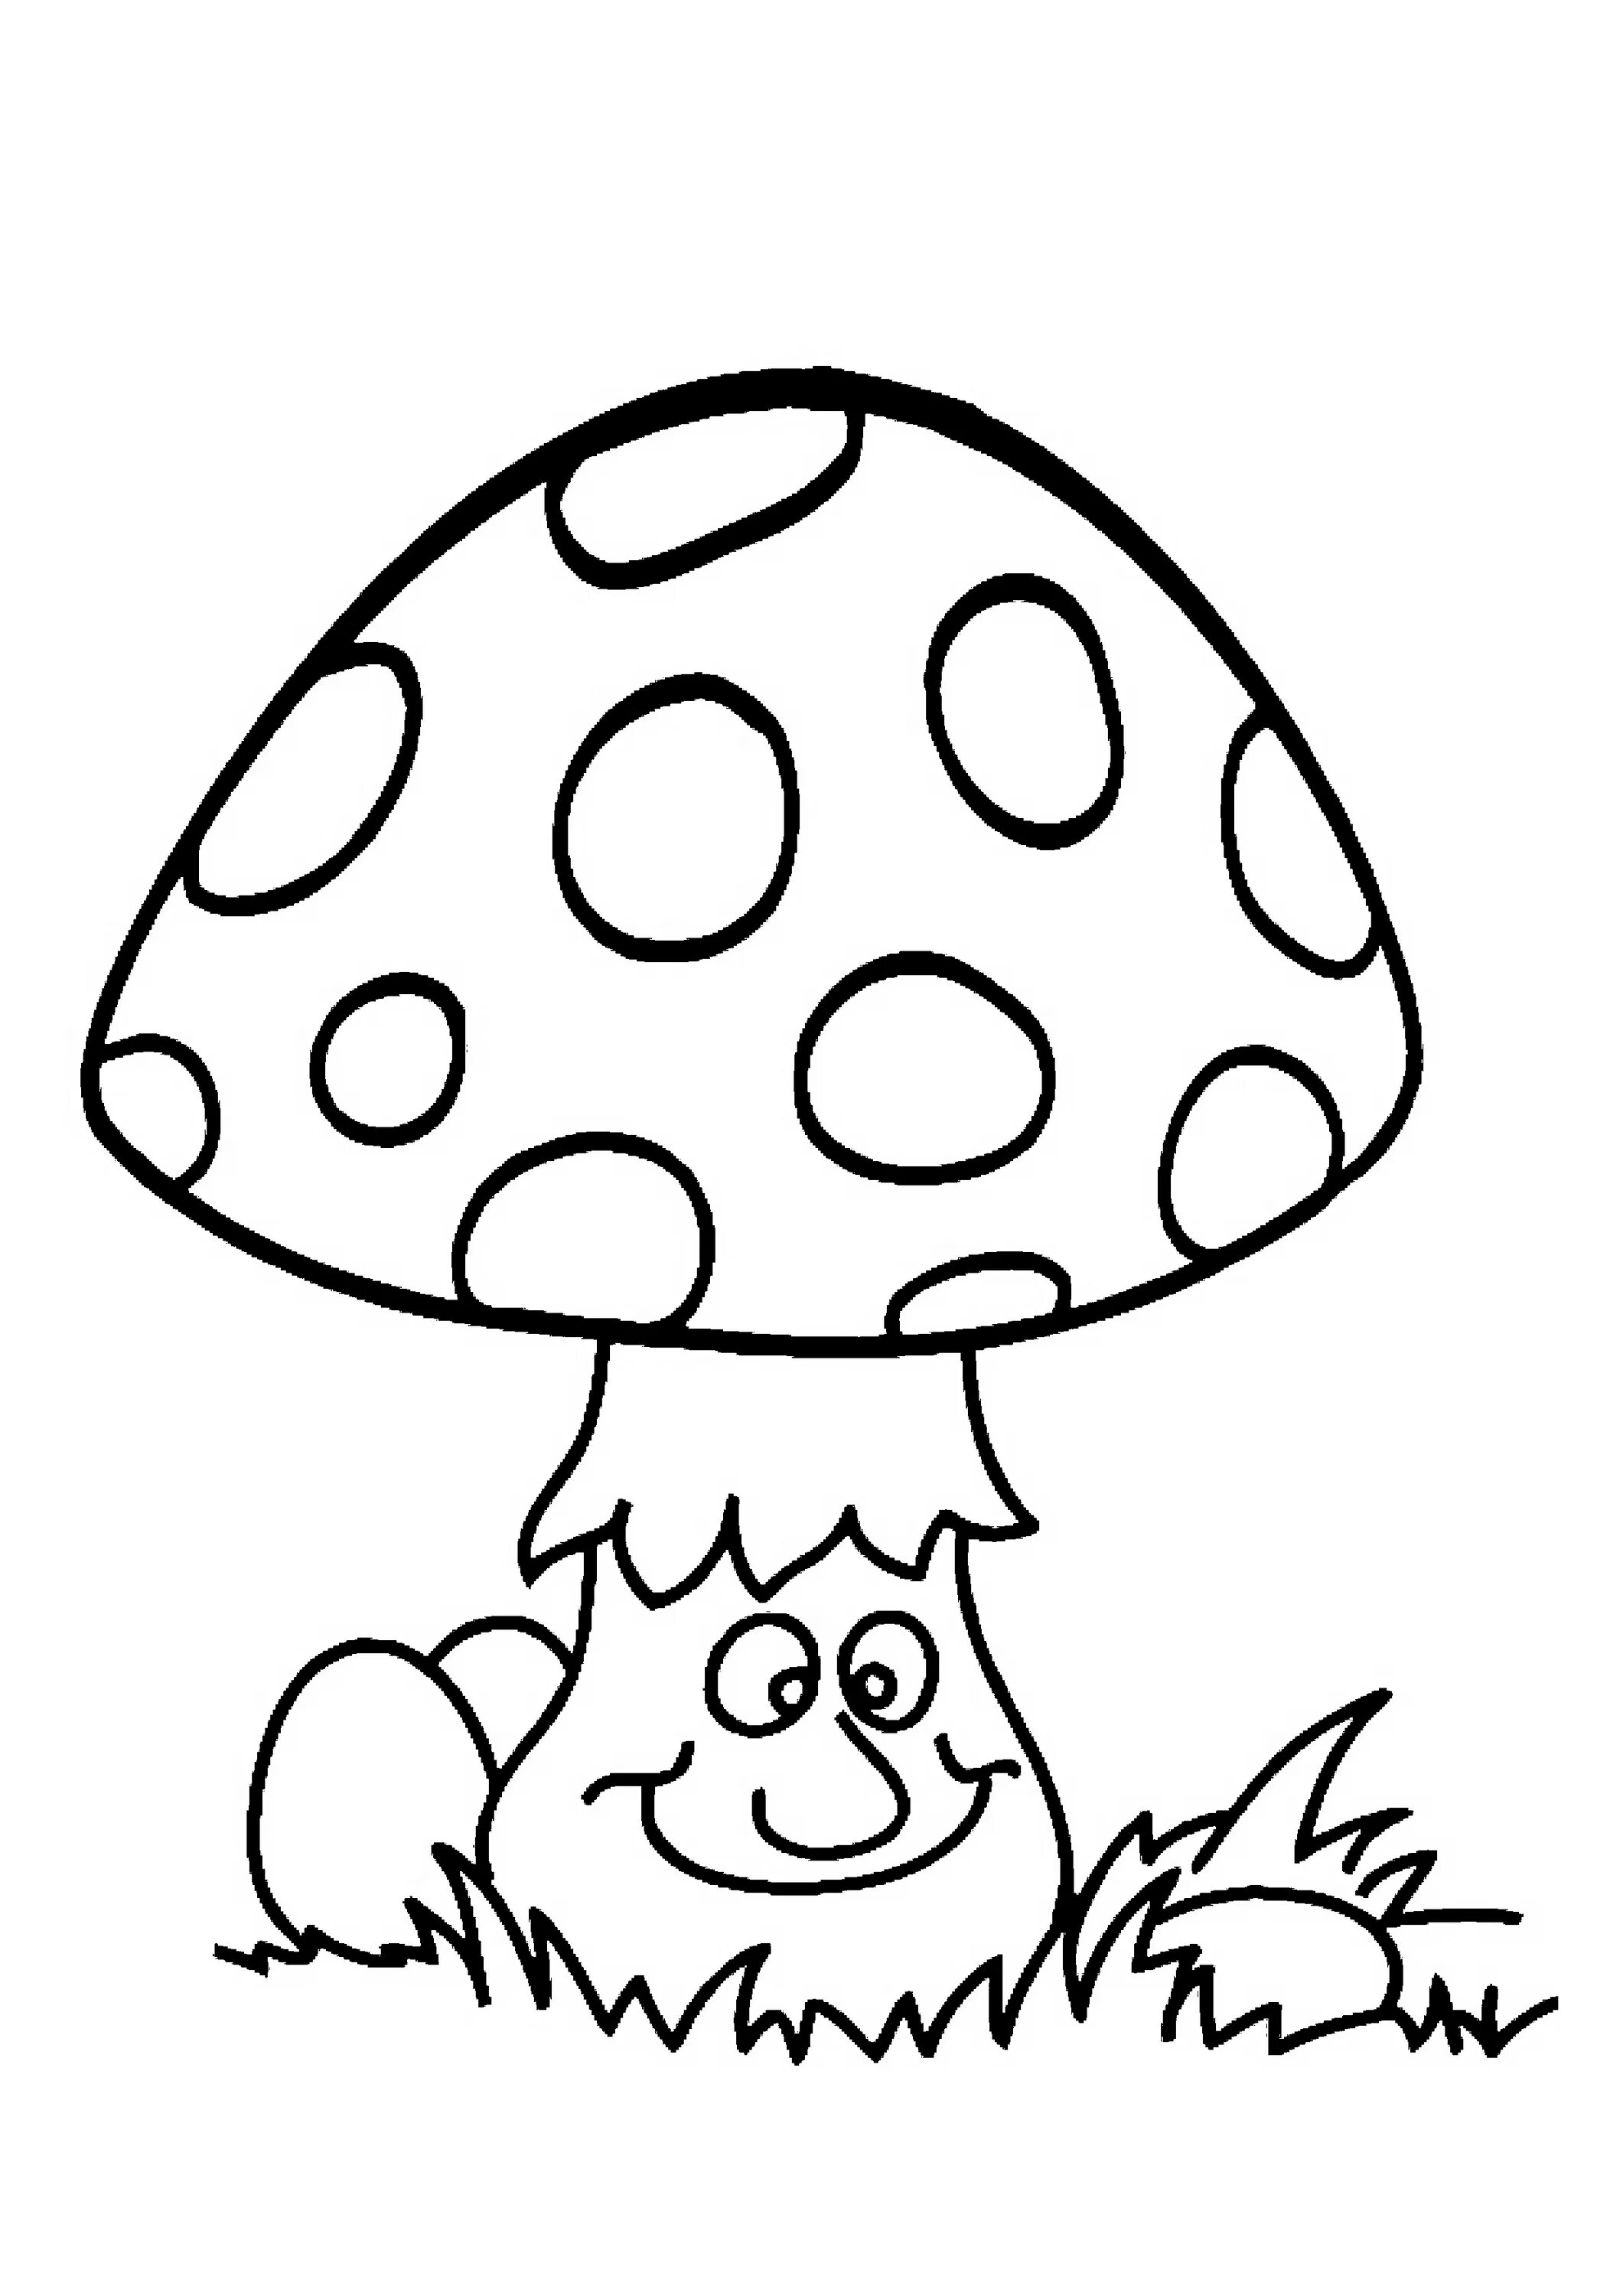 Great fly agaric coloring book for kids